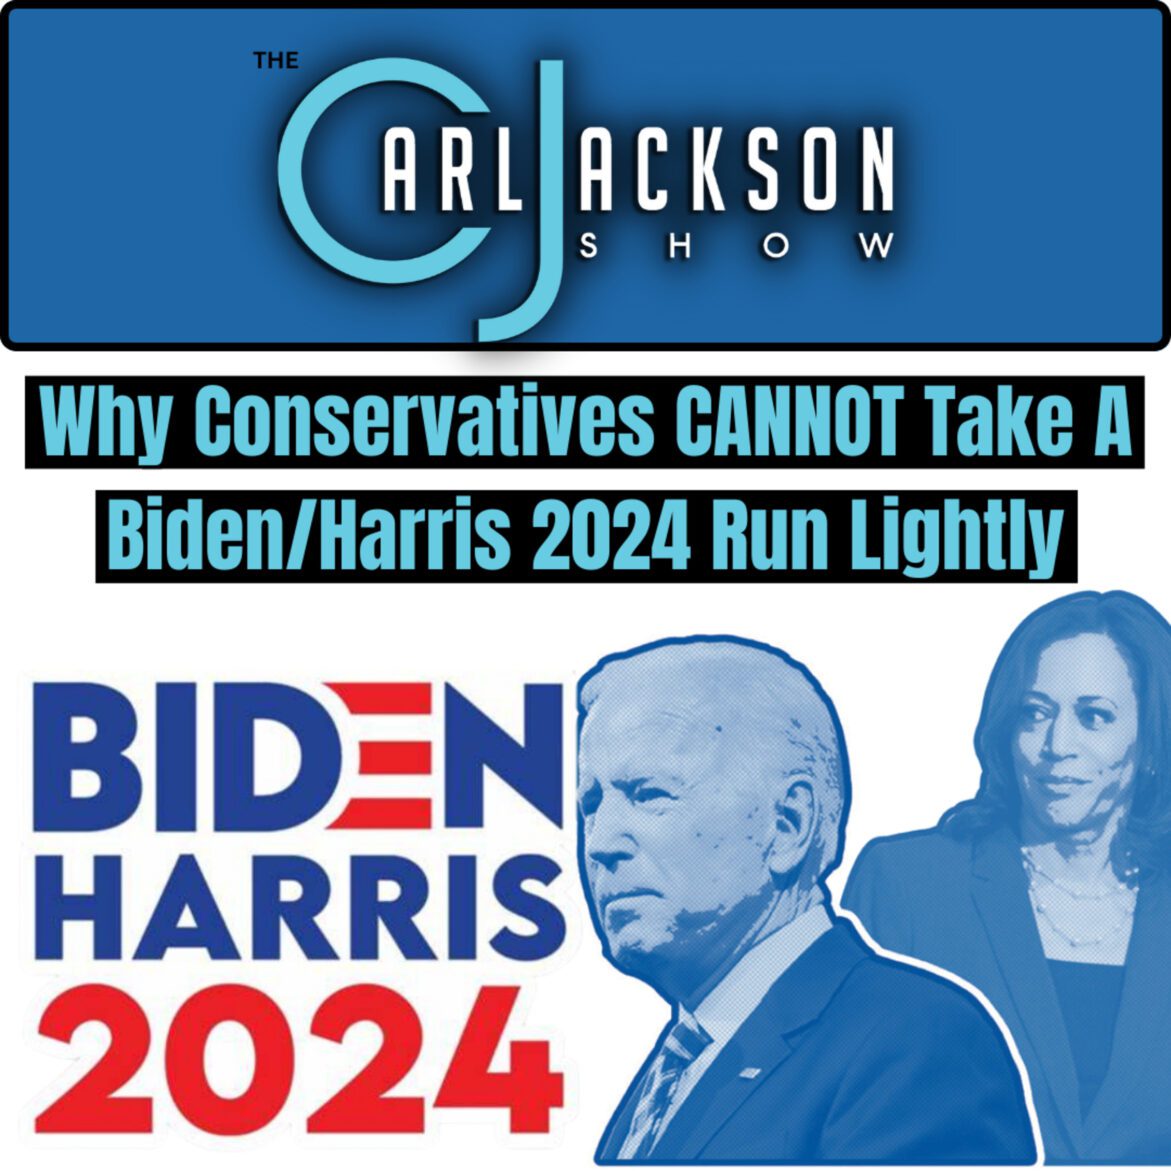 Black Podcasting - Why Conservatives CANNOT Take A Biden/Harris 2024 Run Lightly